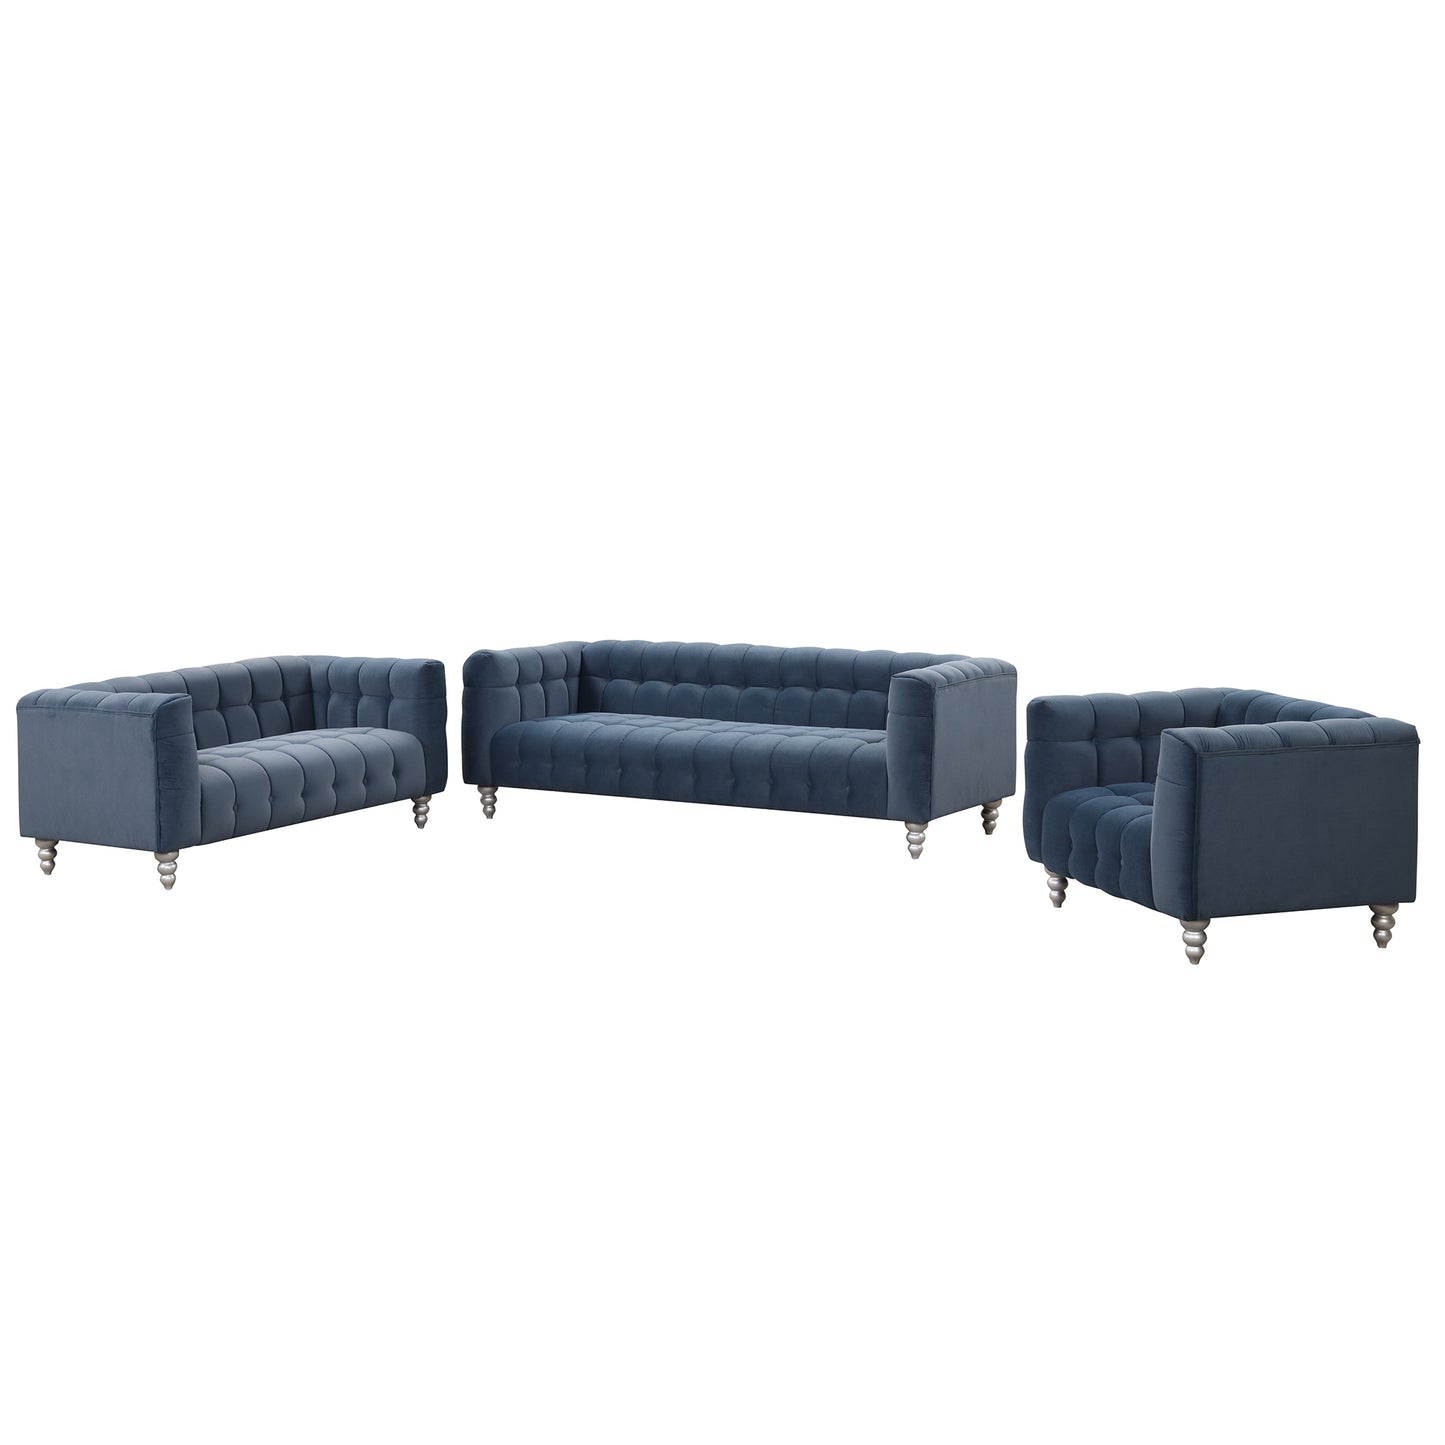 Modern 3-piece sofa set with solid wood legs, buttoned tufted backrest, Dutch fleece upholstered sofa set including three-seater sofa, double seat and living room furniture set single chair, blue